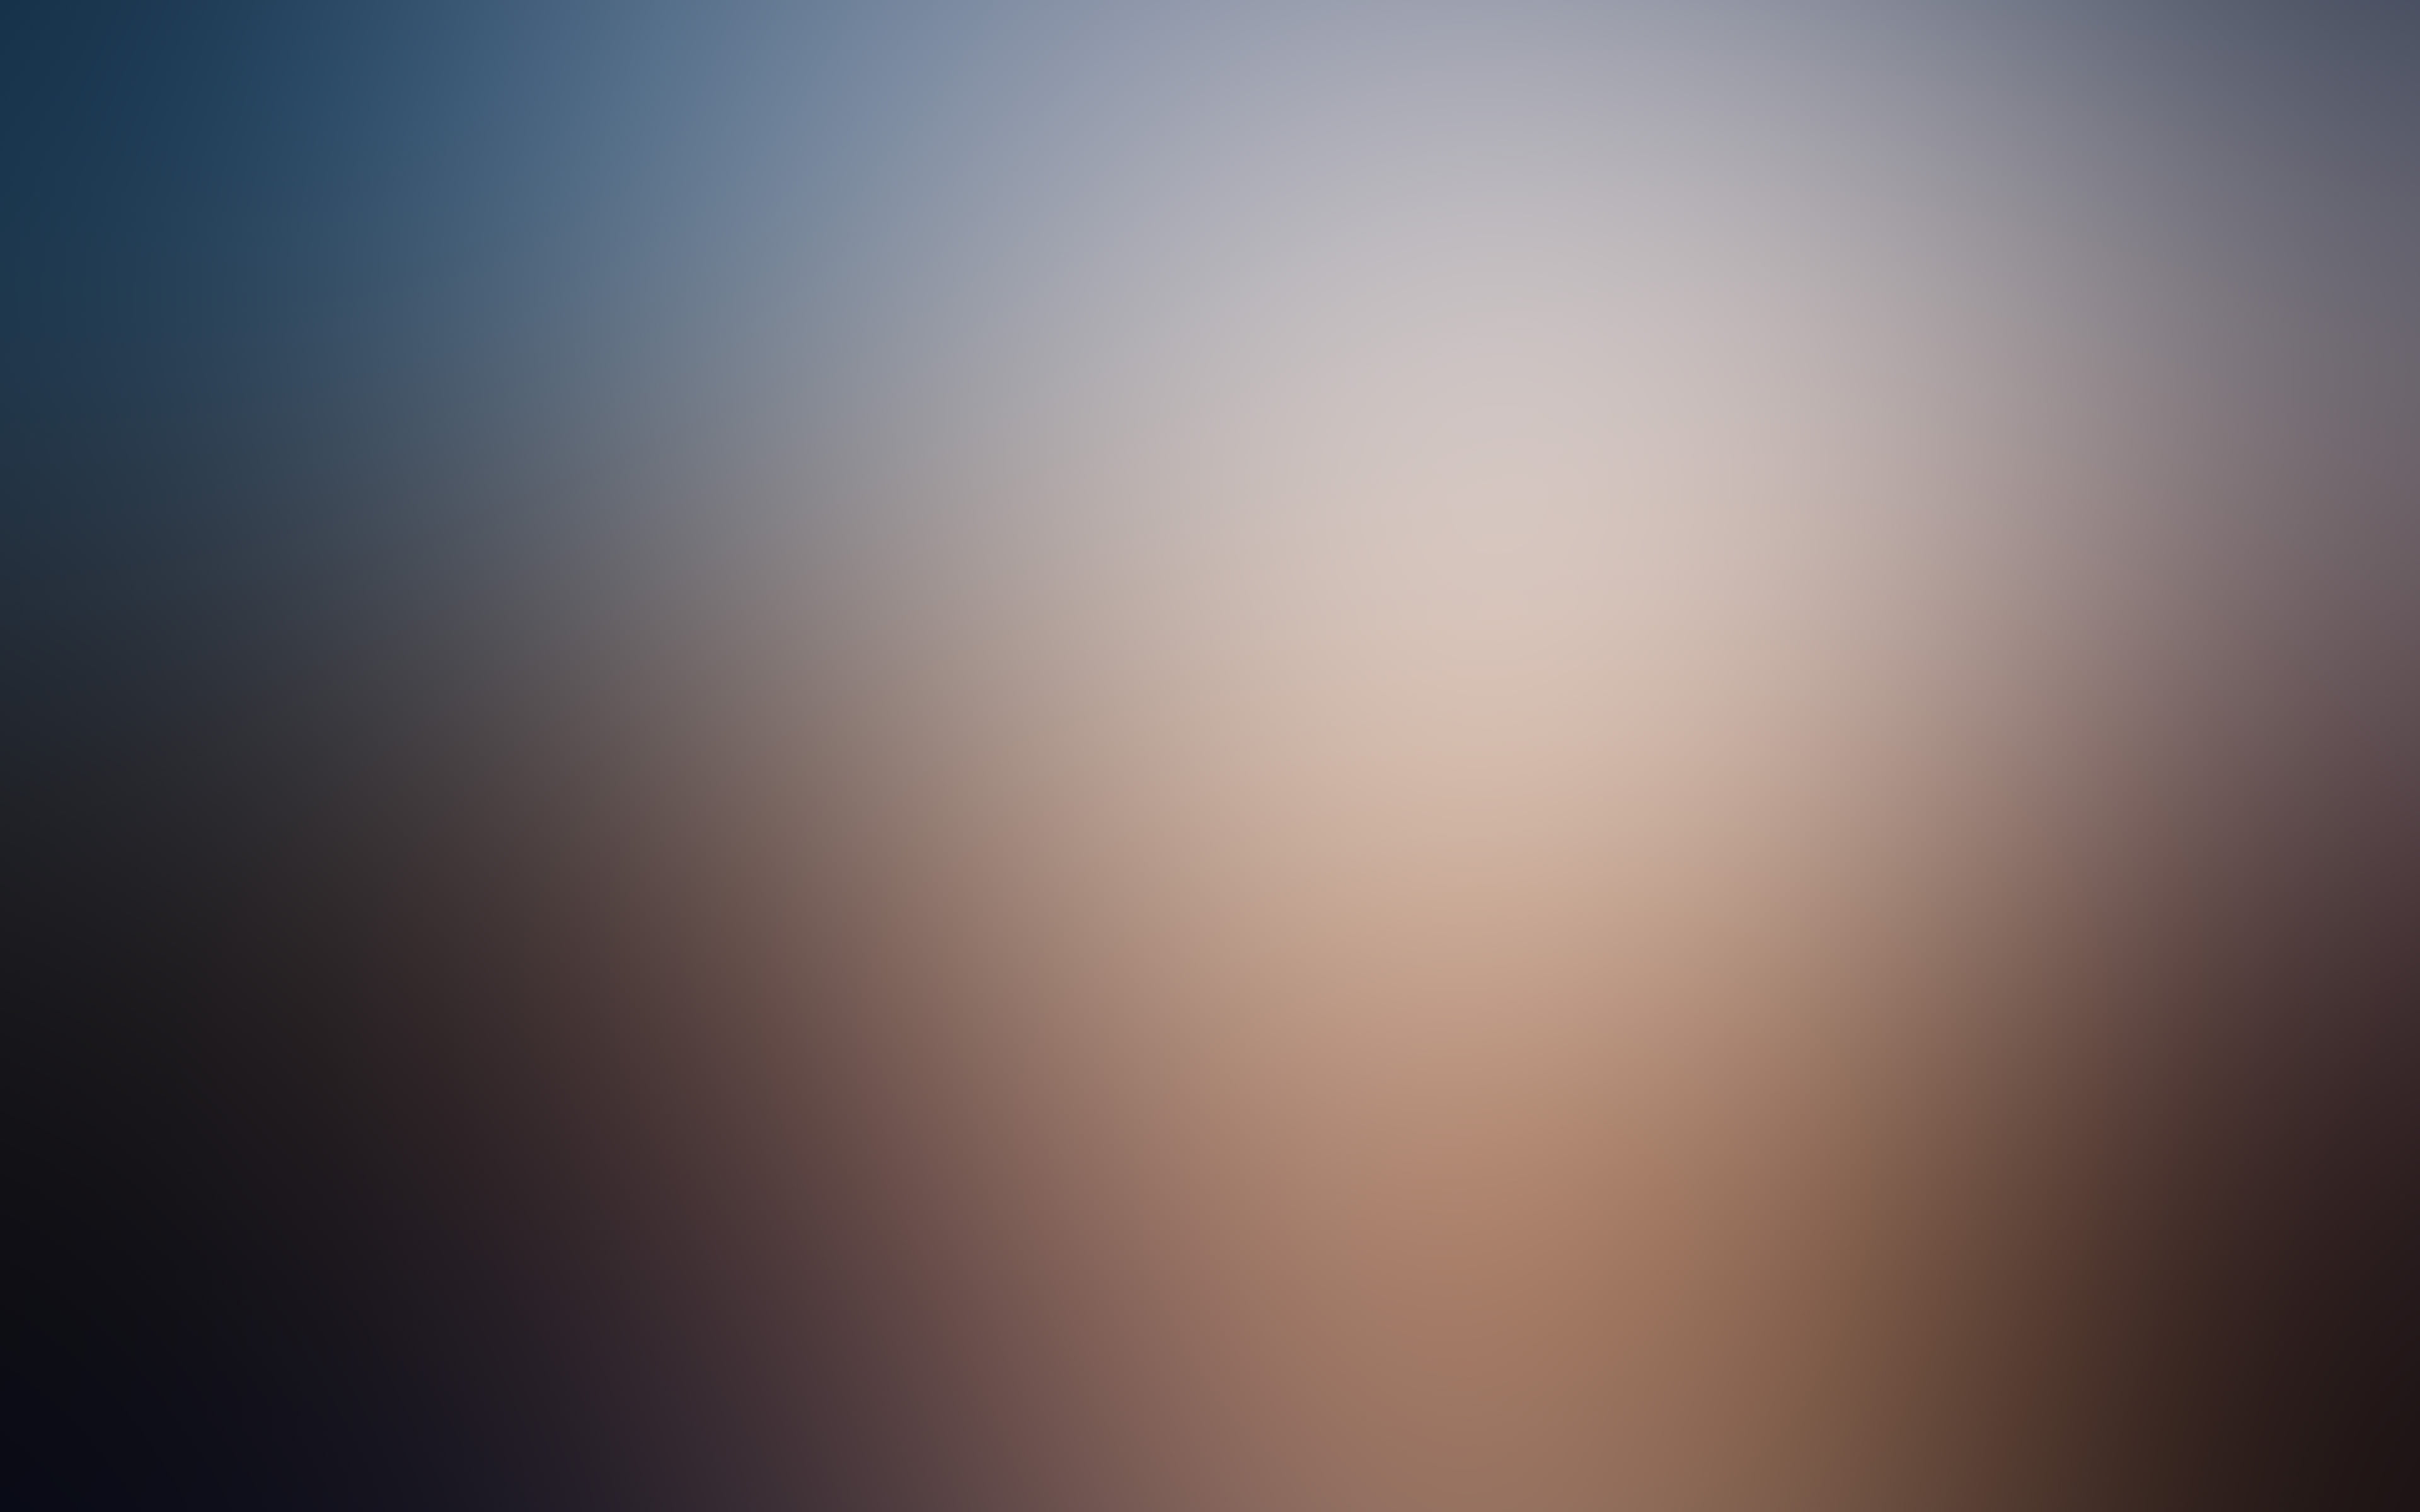 lake, view, soft, gradation, blur, backgrounds, abstract, gray